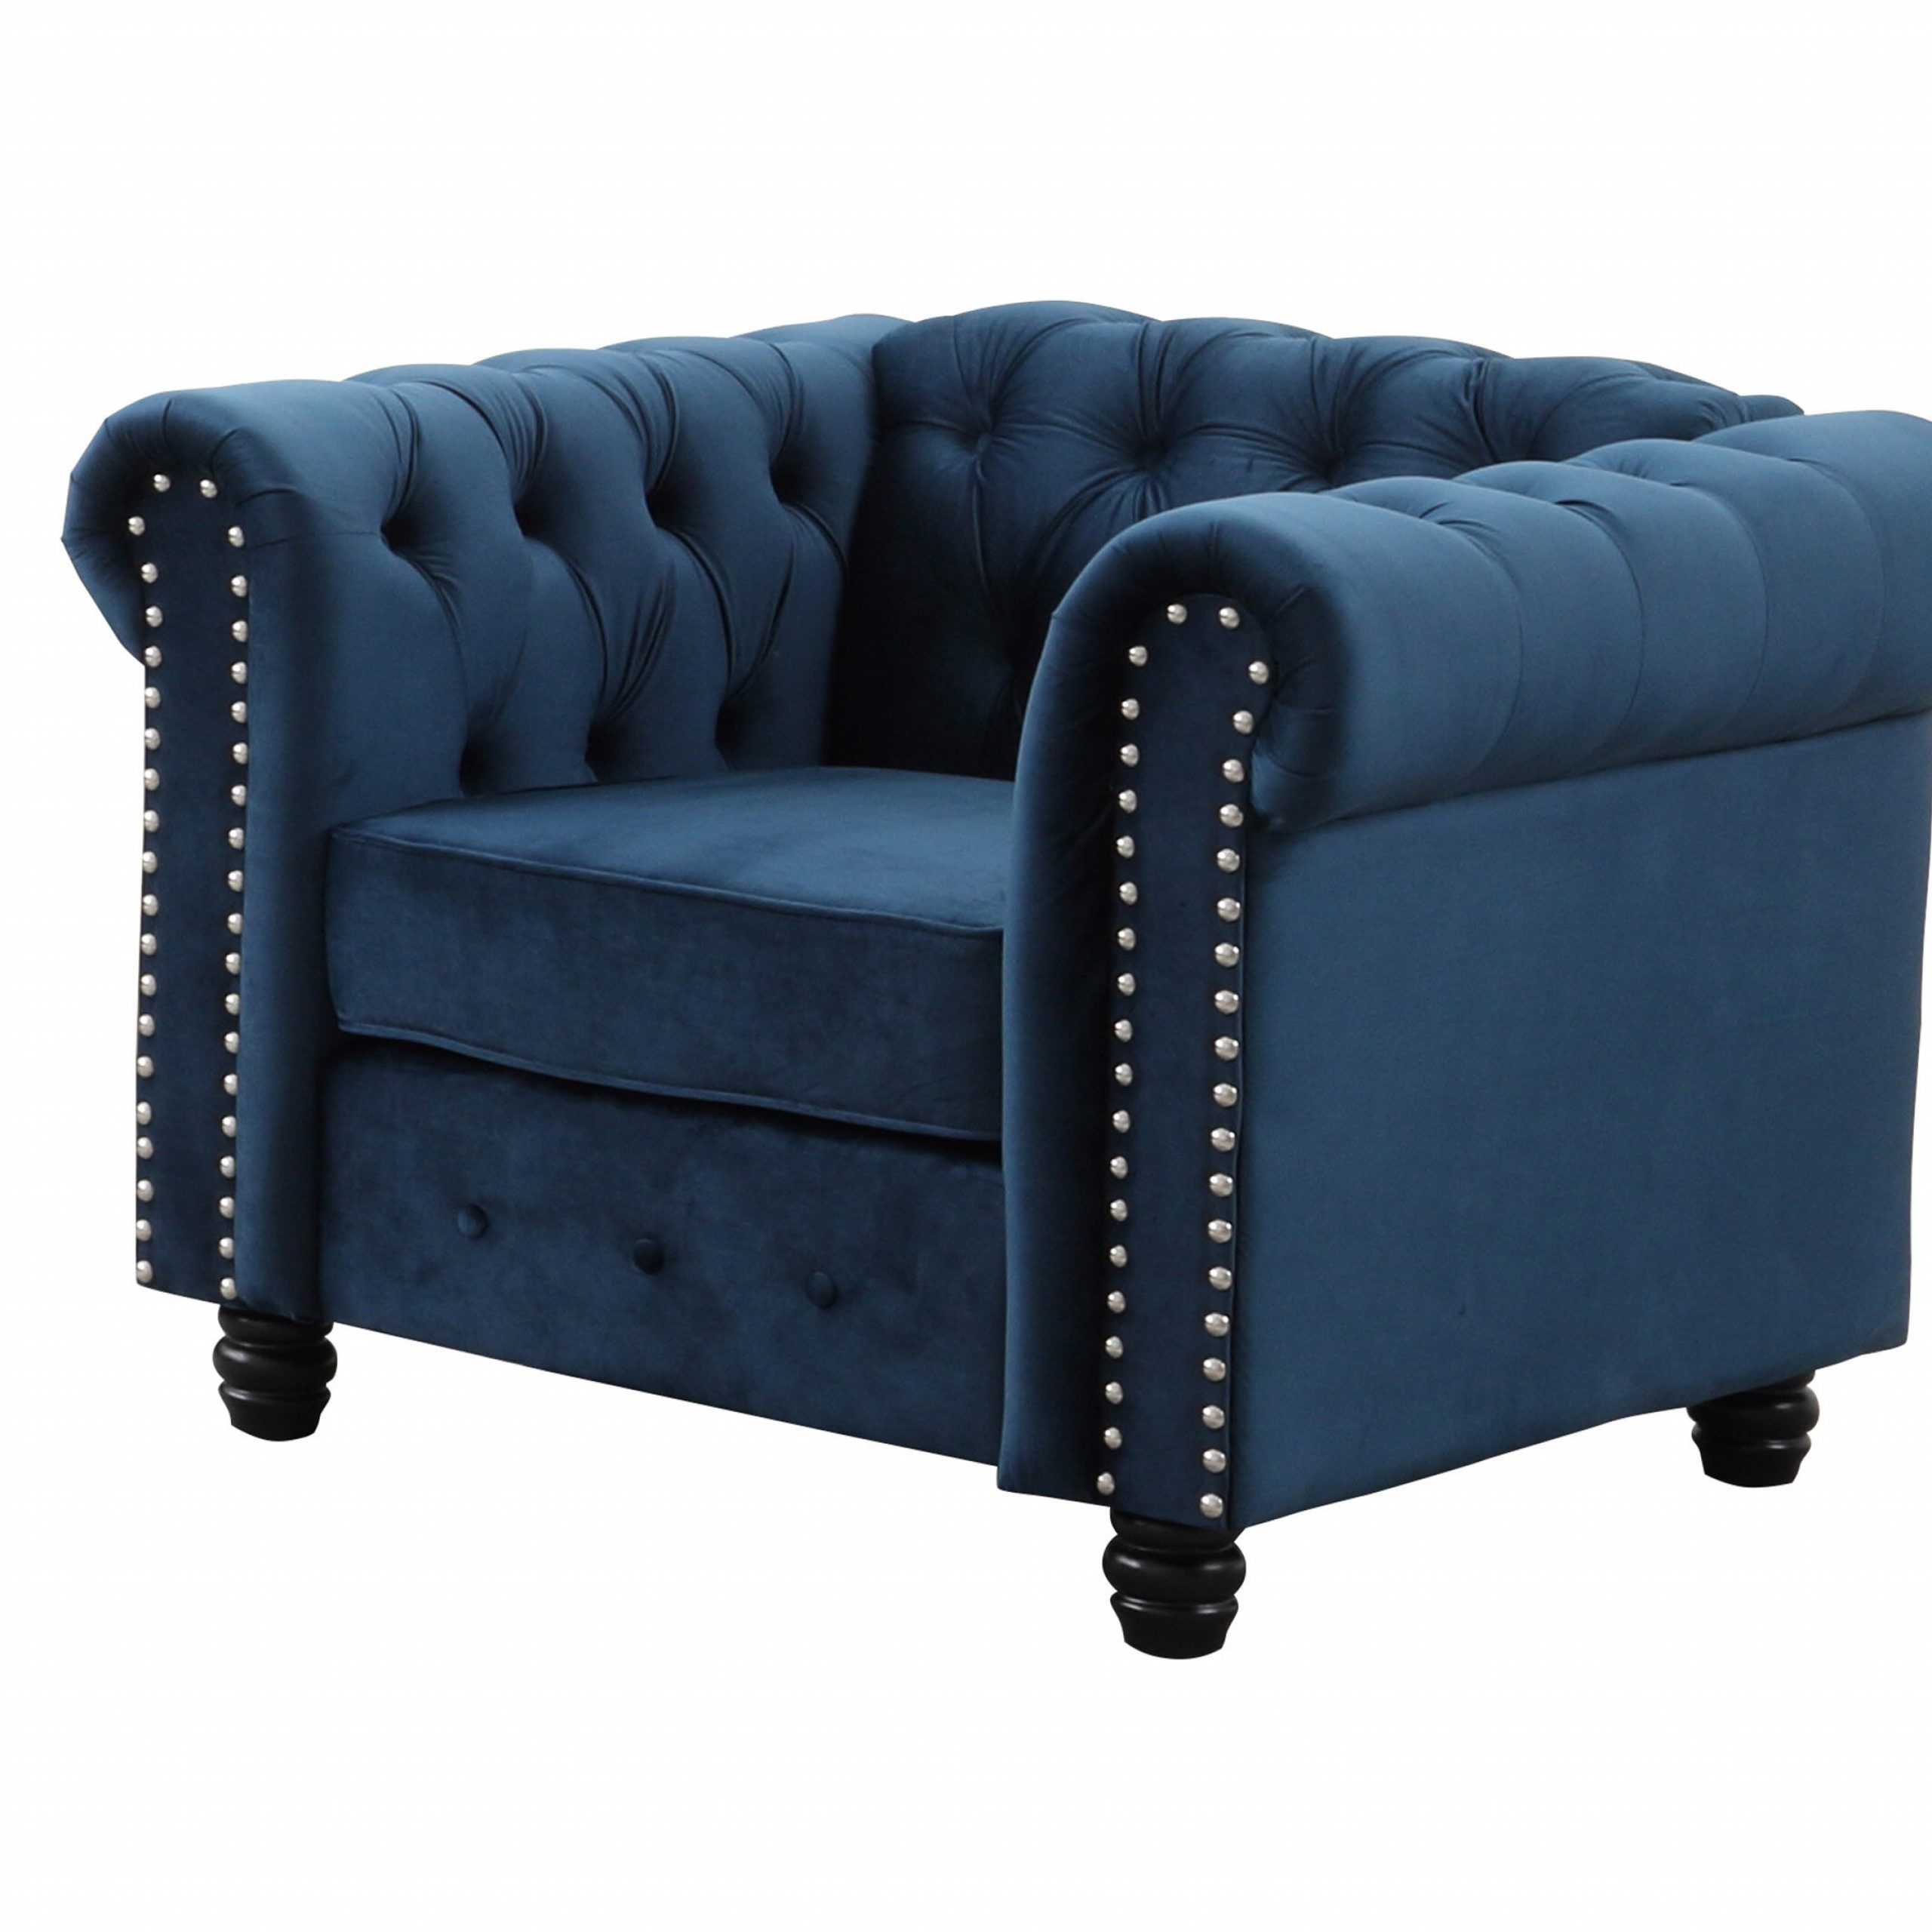 Ys001 35'' W Tufted Velvet Armchair For Galesville Tufted Polyester Wingback Chairs (View 13 of 15)